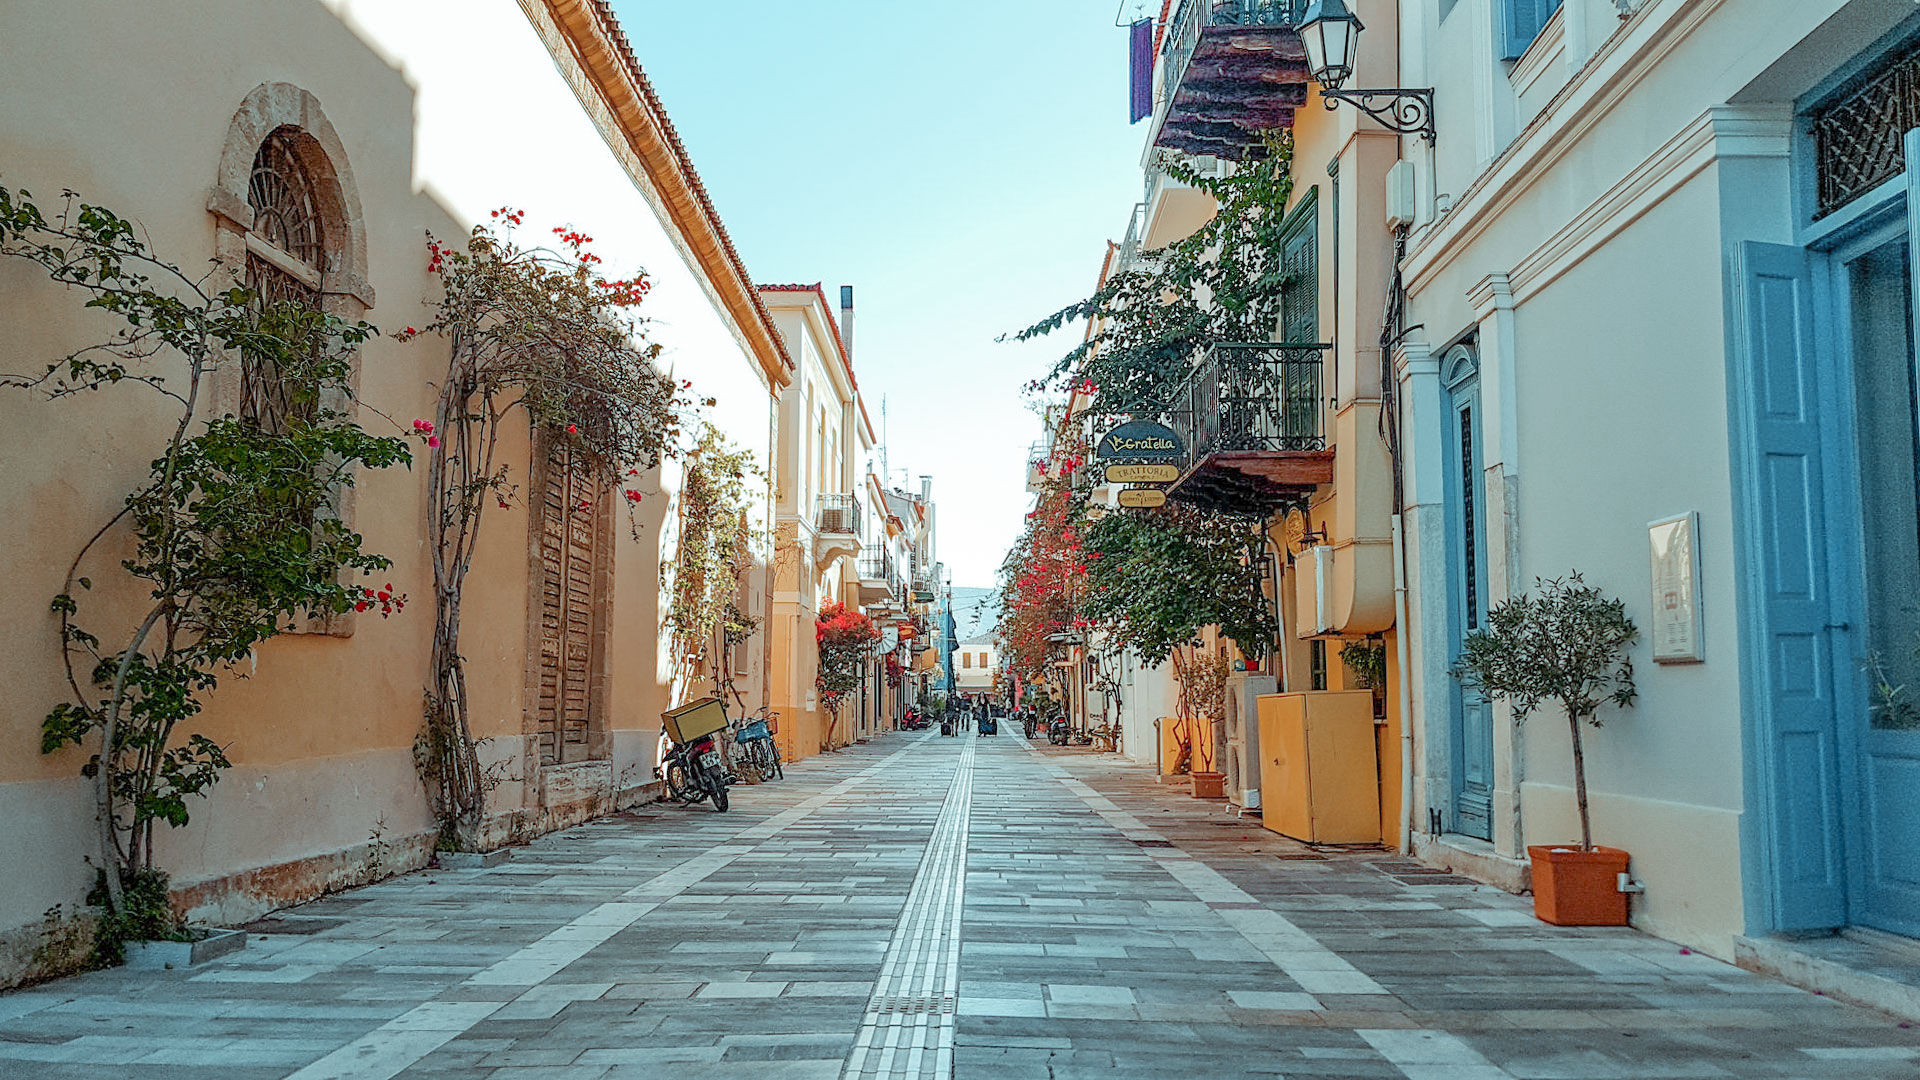 Alleways of the old town in Nafplio